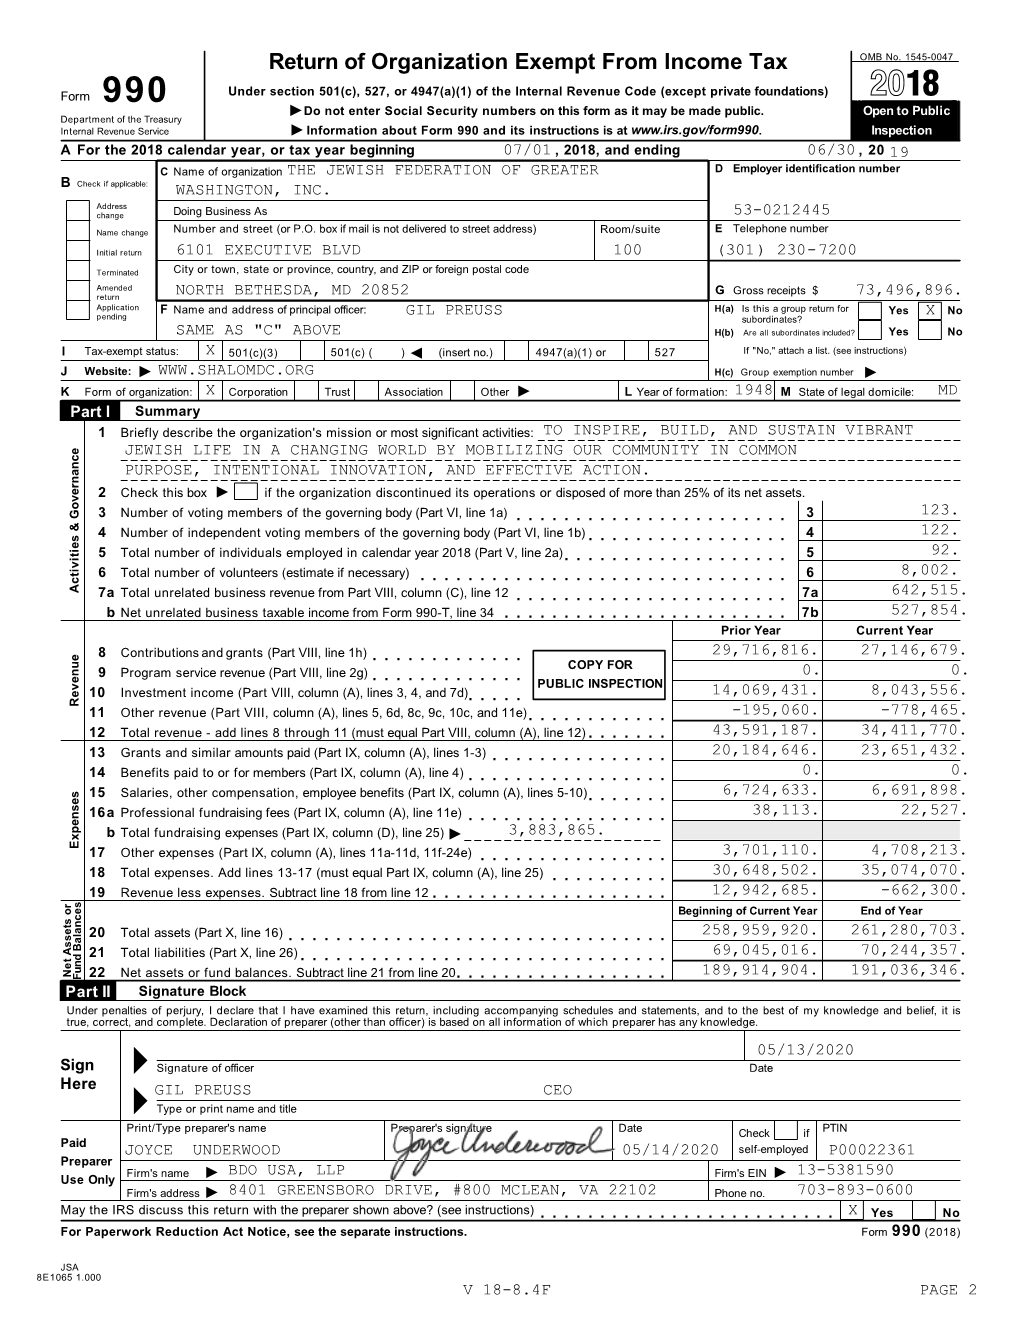 Business Taxable Income from Form 990-T, Line 34 7B 527,854